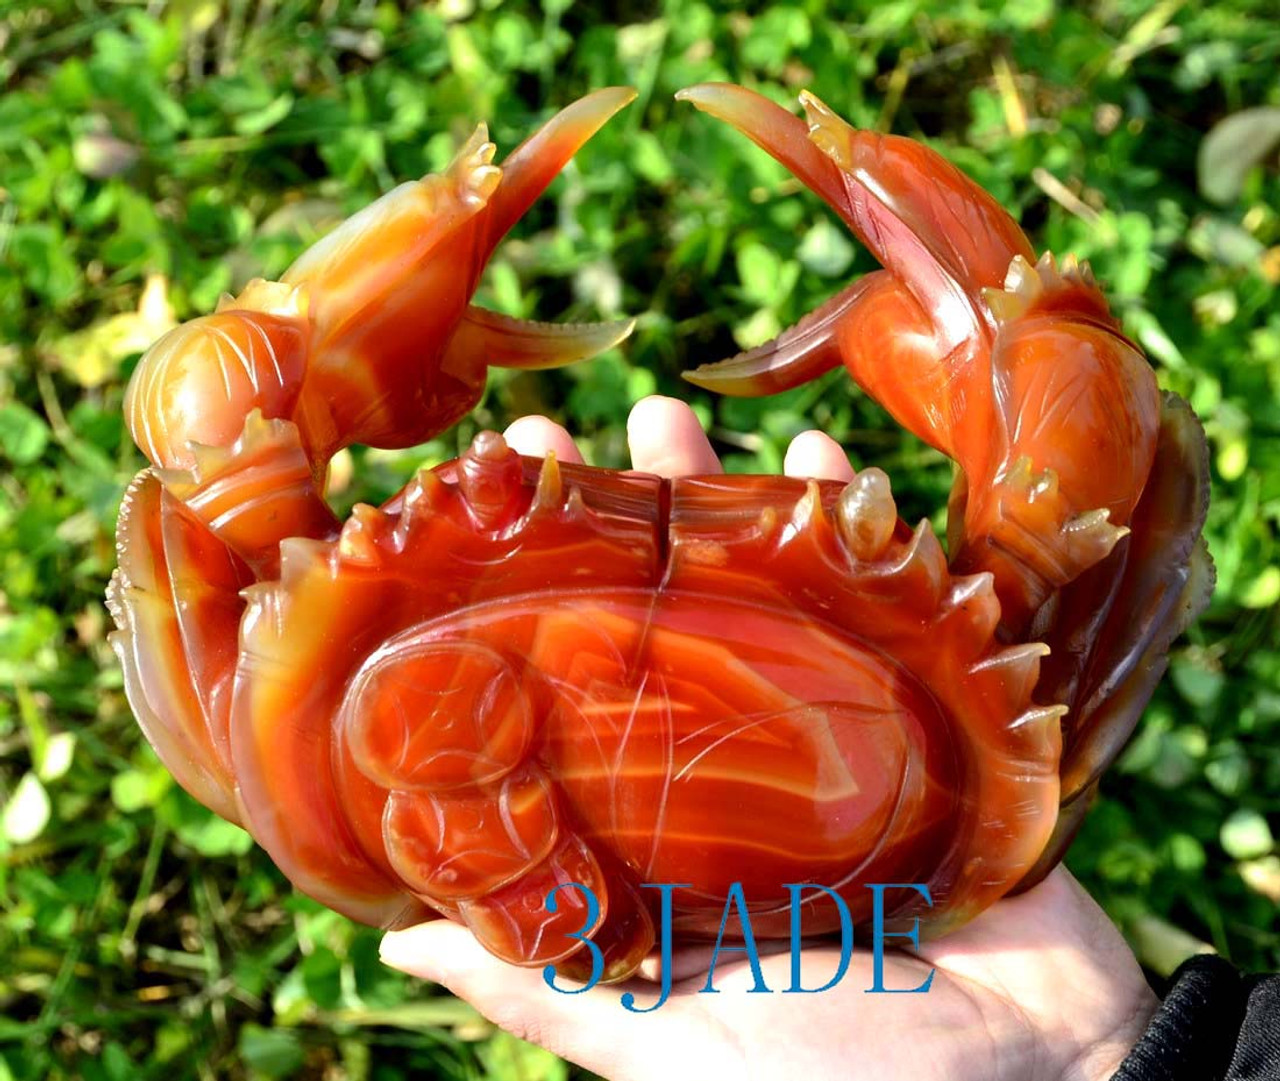 8" Red Agate / Carnelian Crab Statue Sculpture / Carving